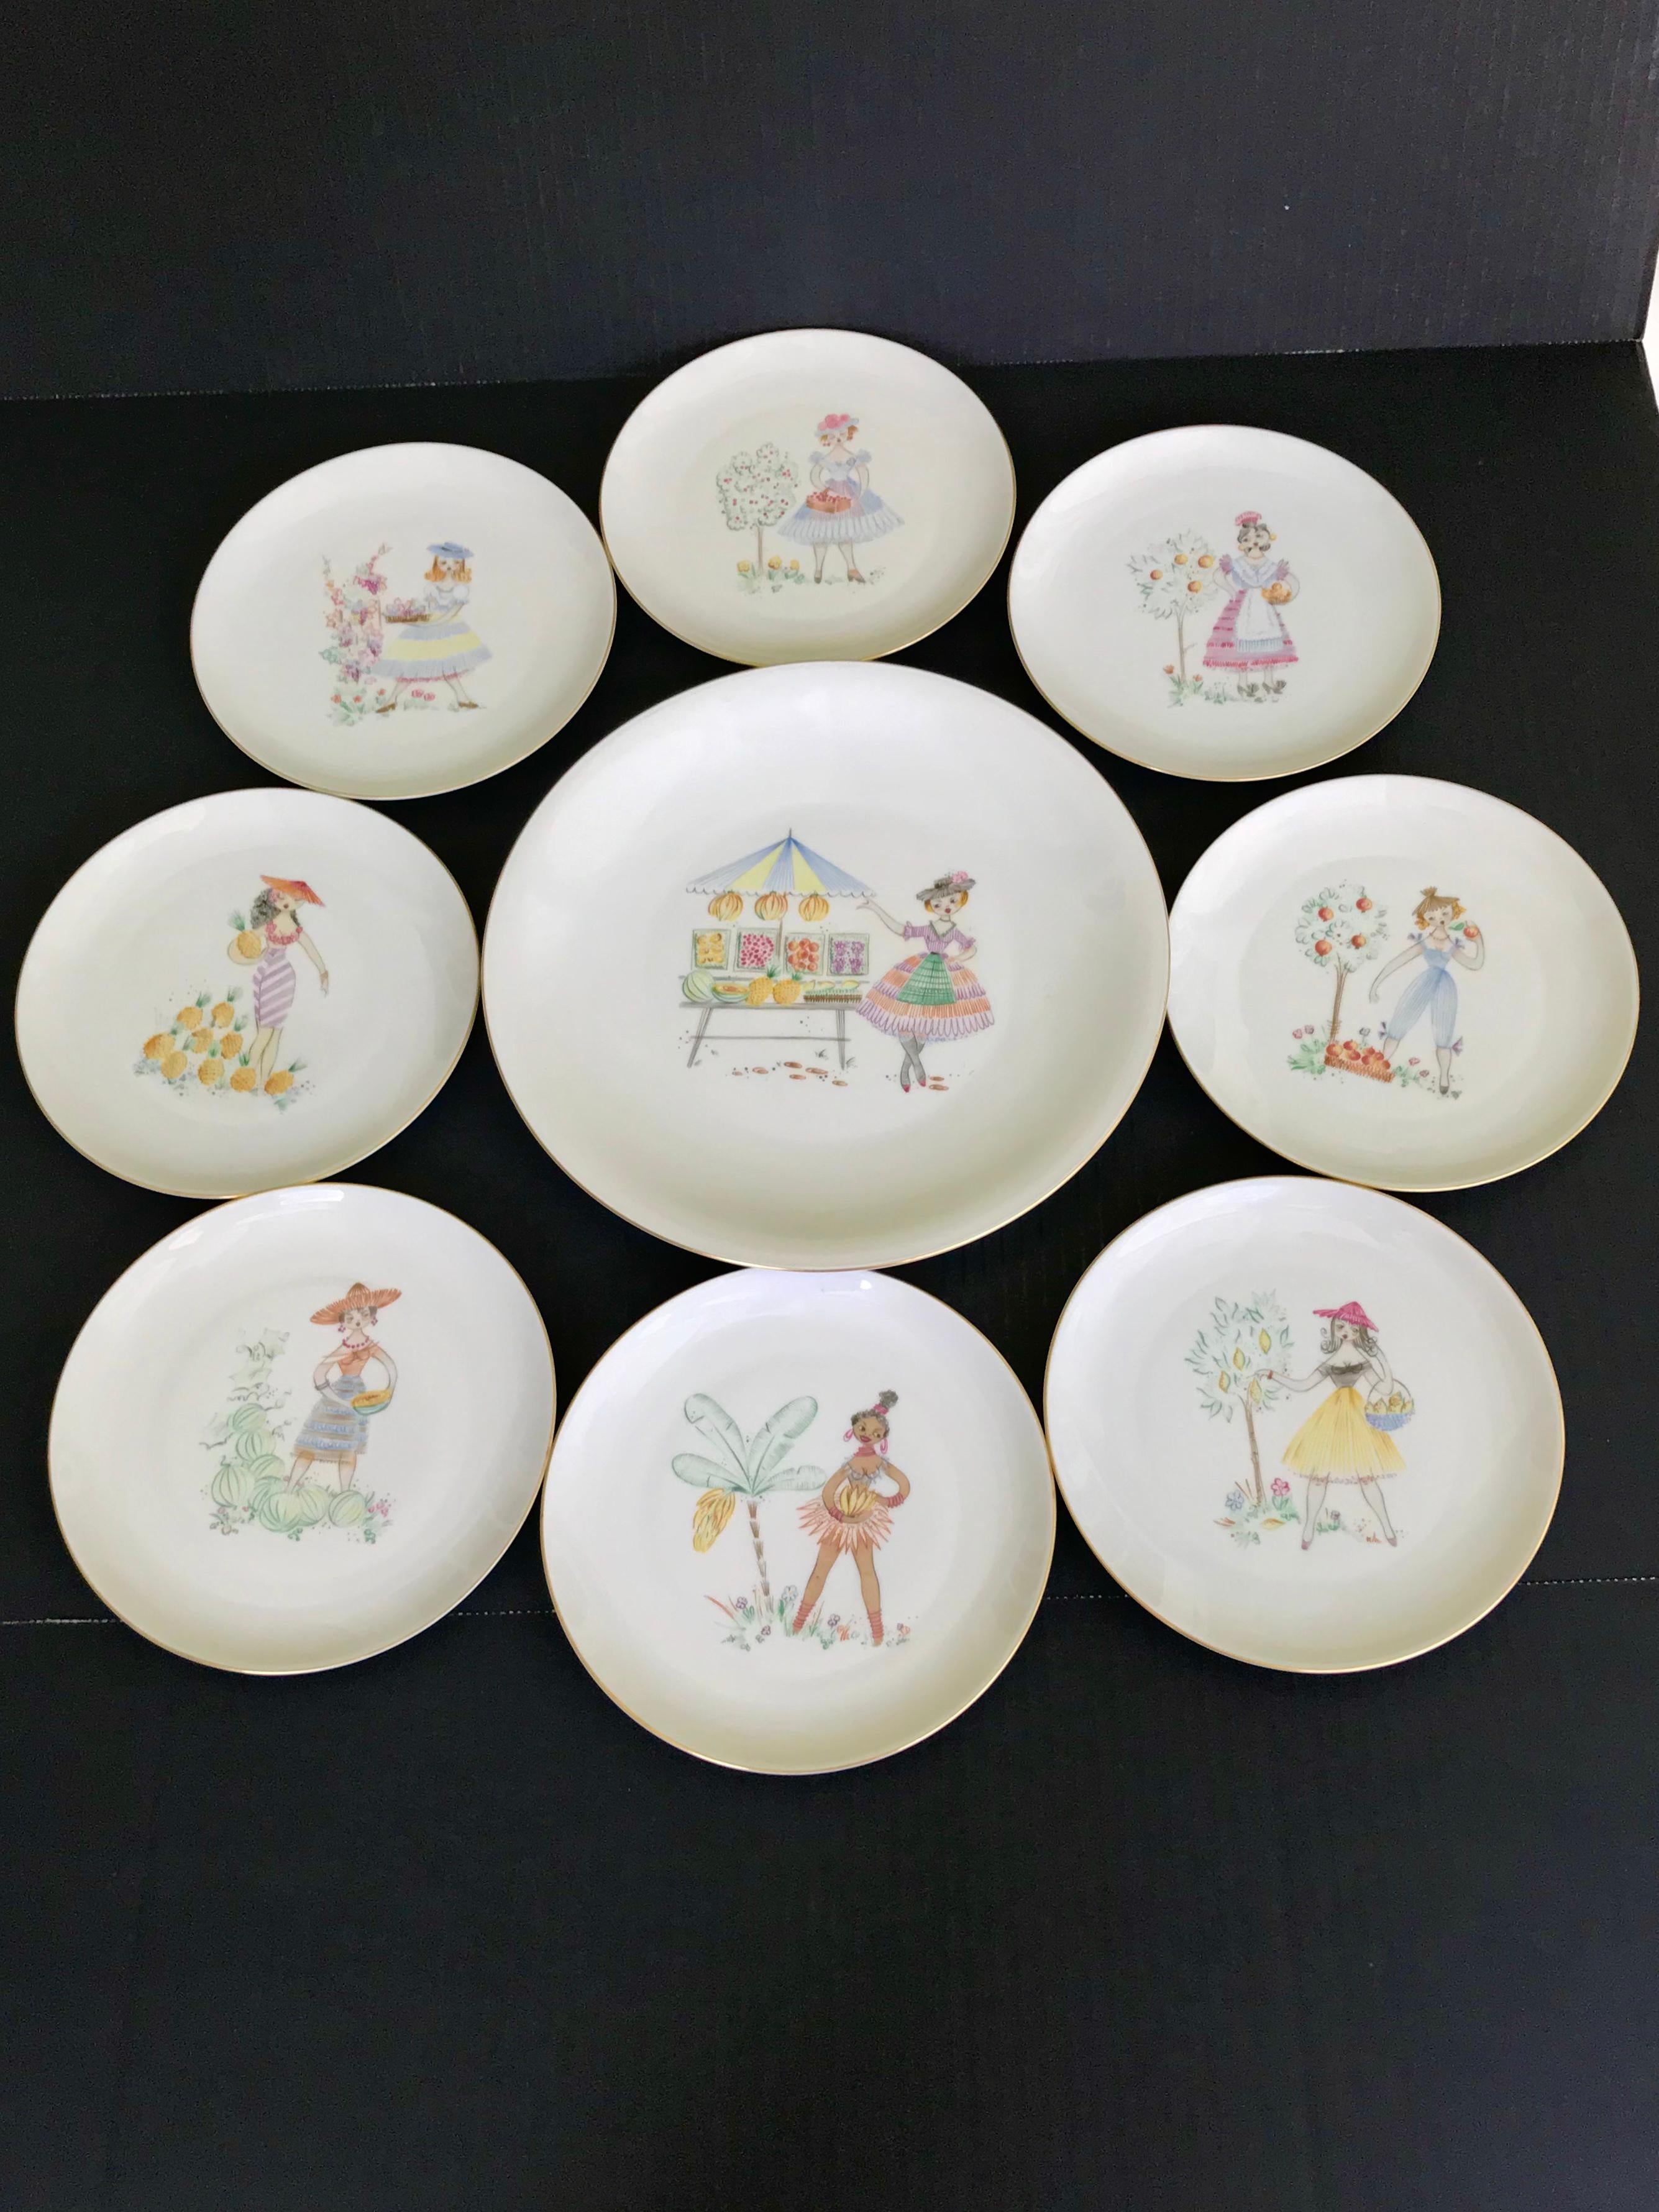 A Set of 9 decorated Porcelain Plates by Heinrich Bavaria, Germany from the 1960s. Consisting of one large serving platter and 8 dessert plates. Each white porcelain plate with a gold band on the rim depicts a young woman with typical fruit grown in